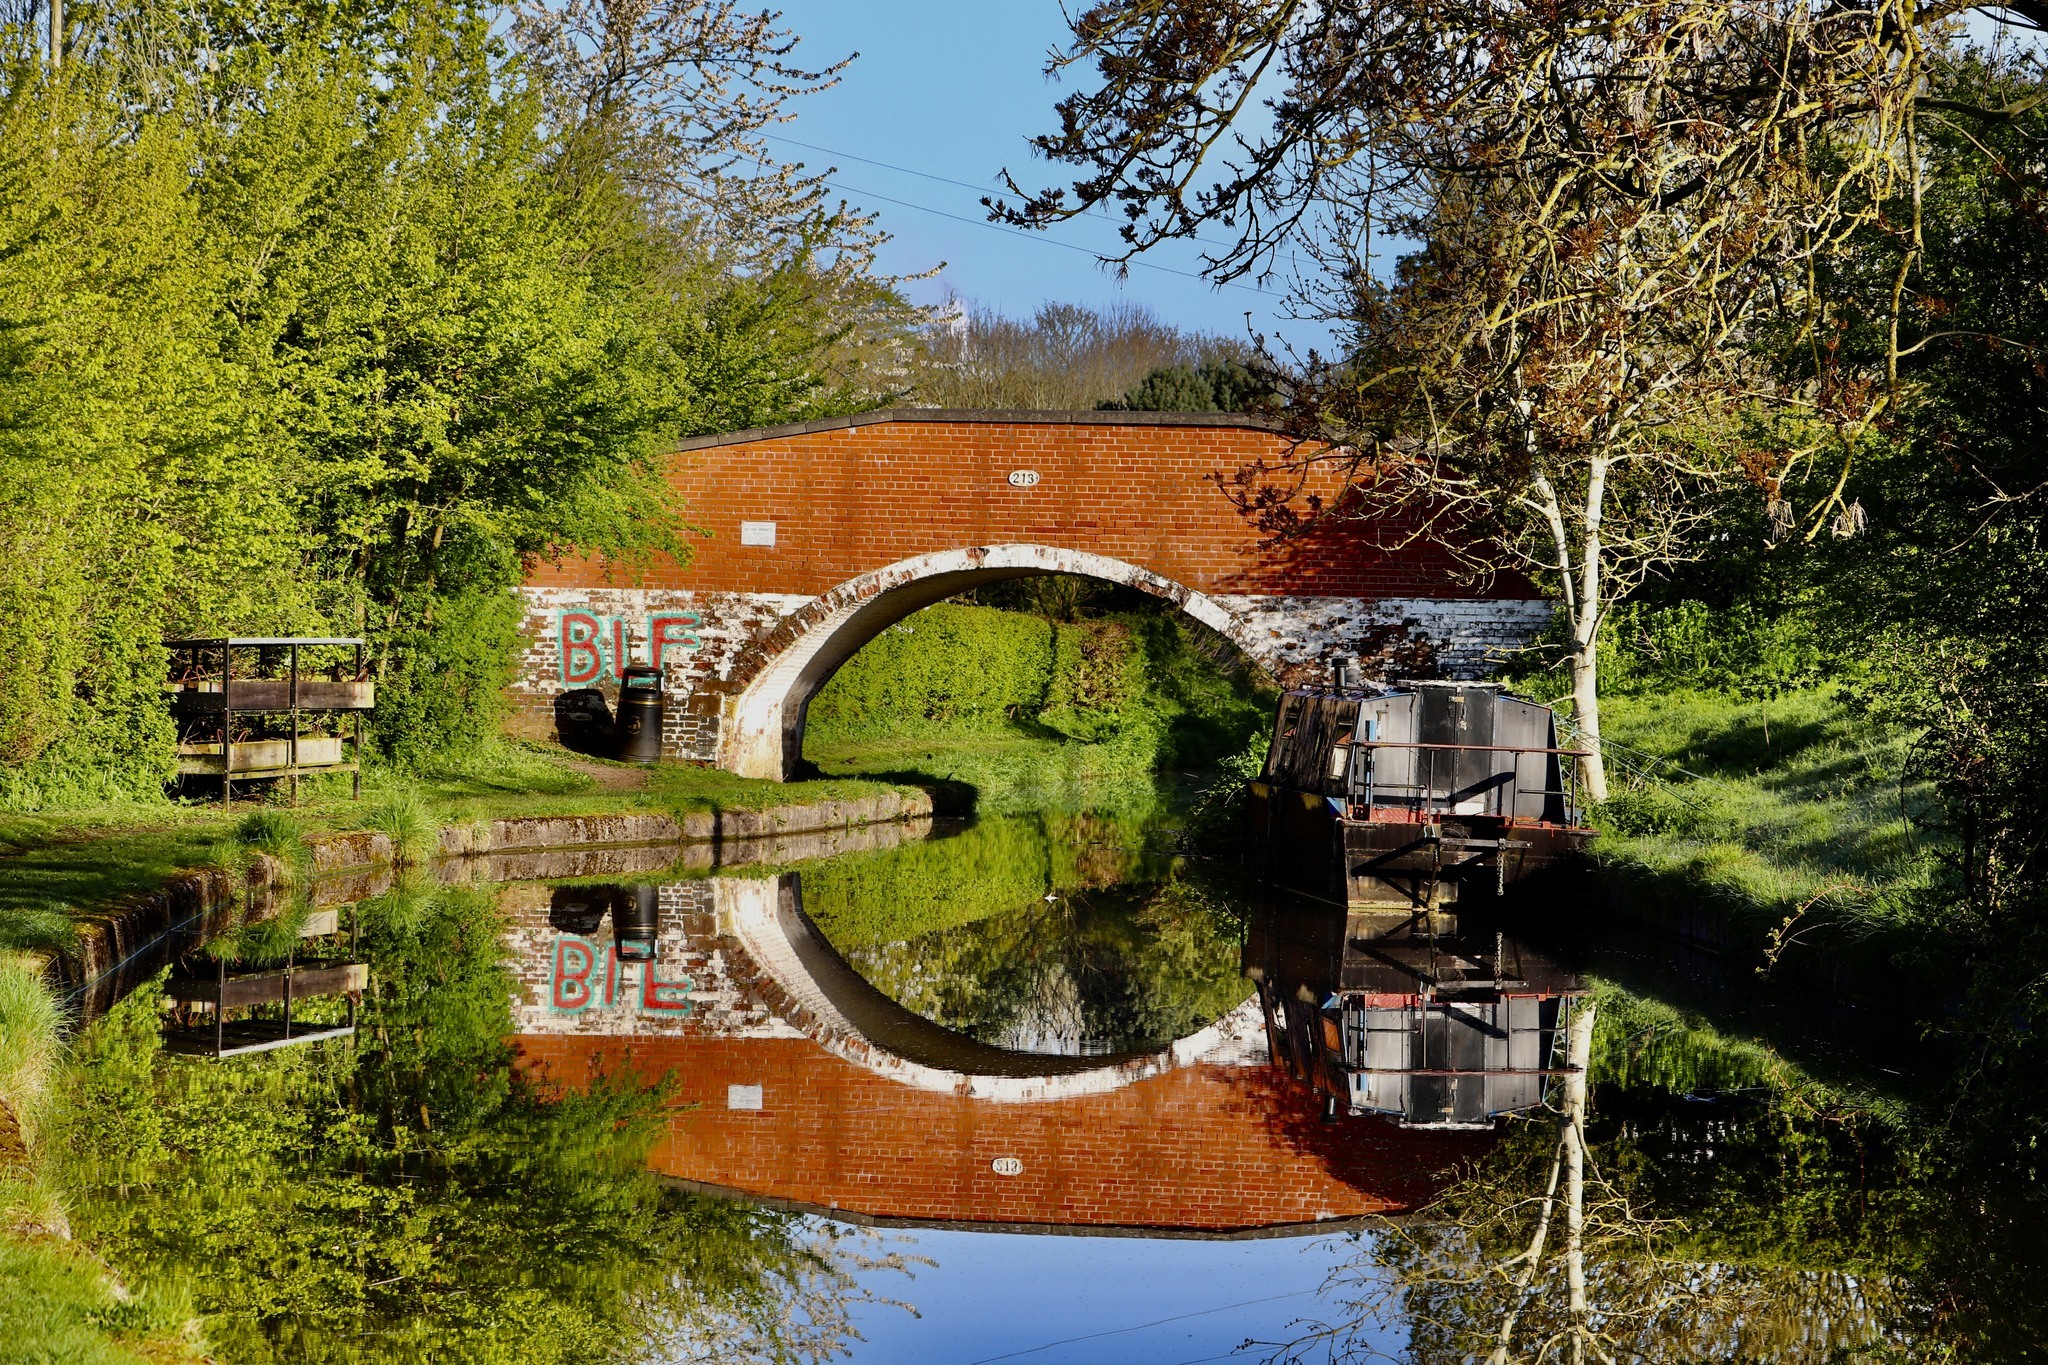 The Trent and Mersey canal by Terry Gregory